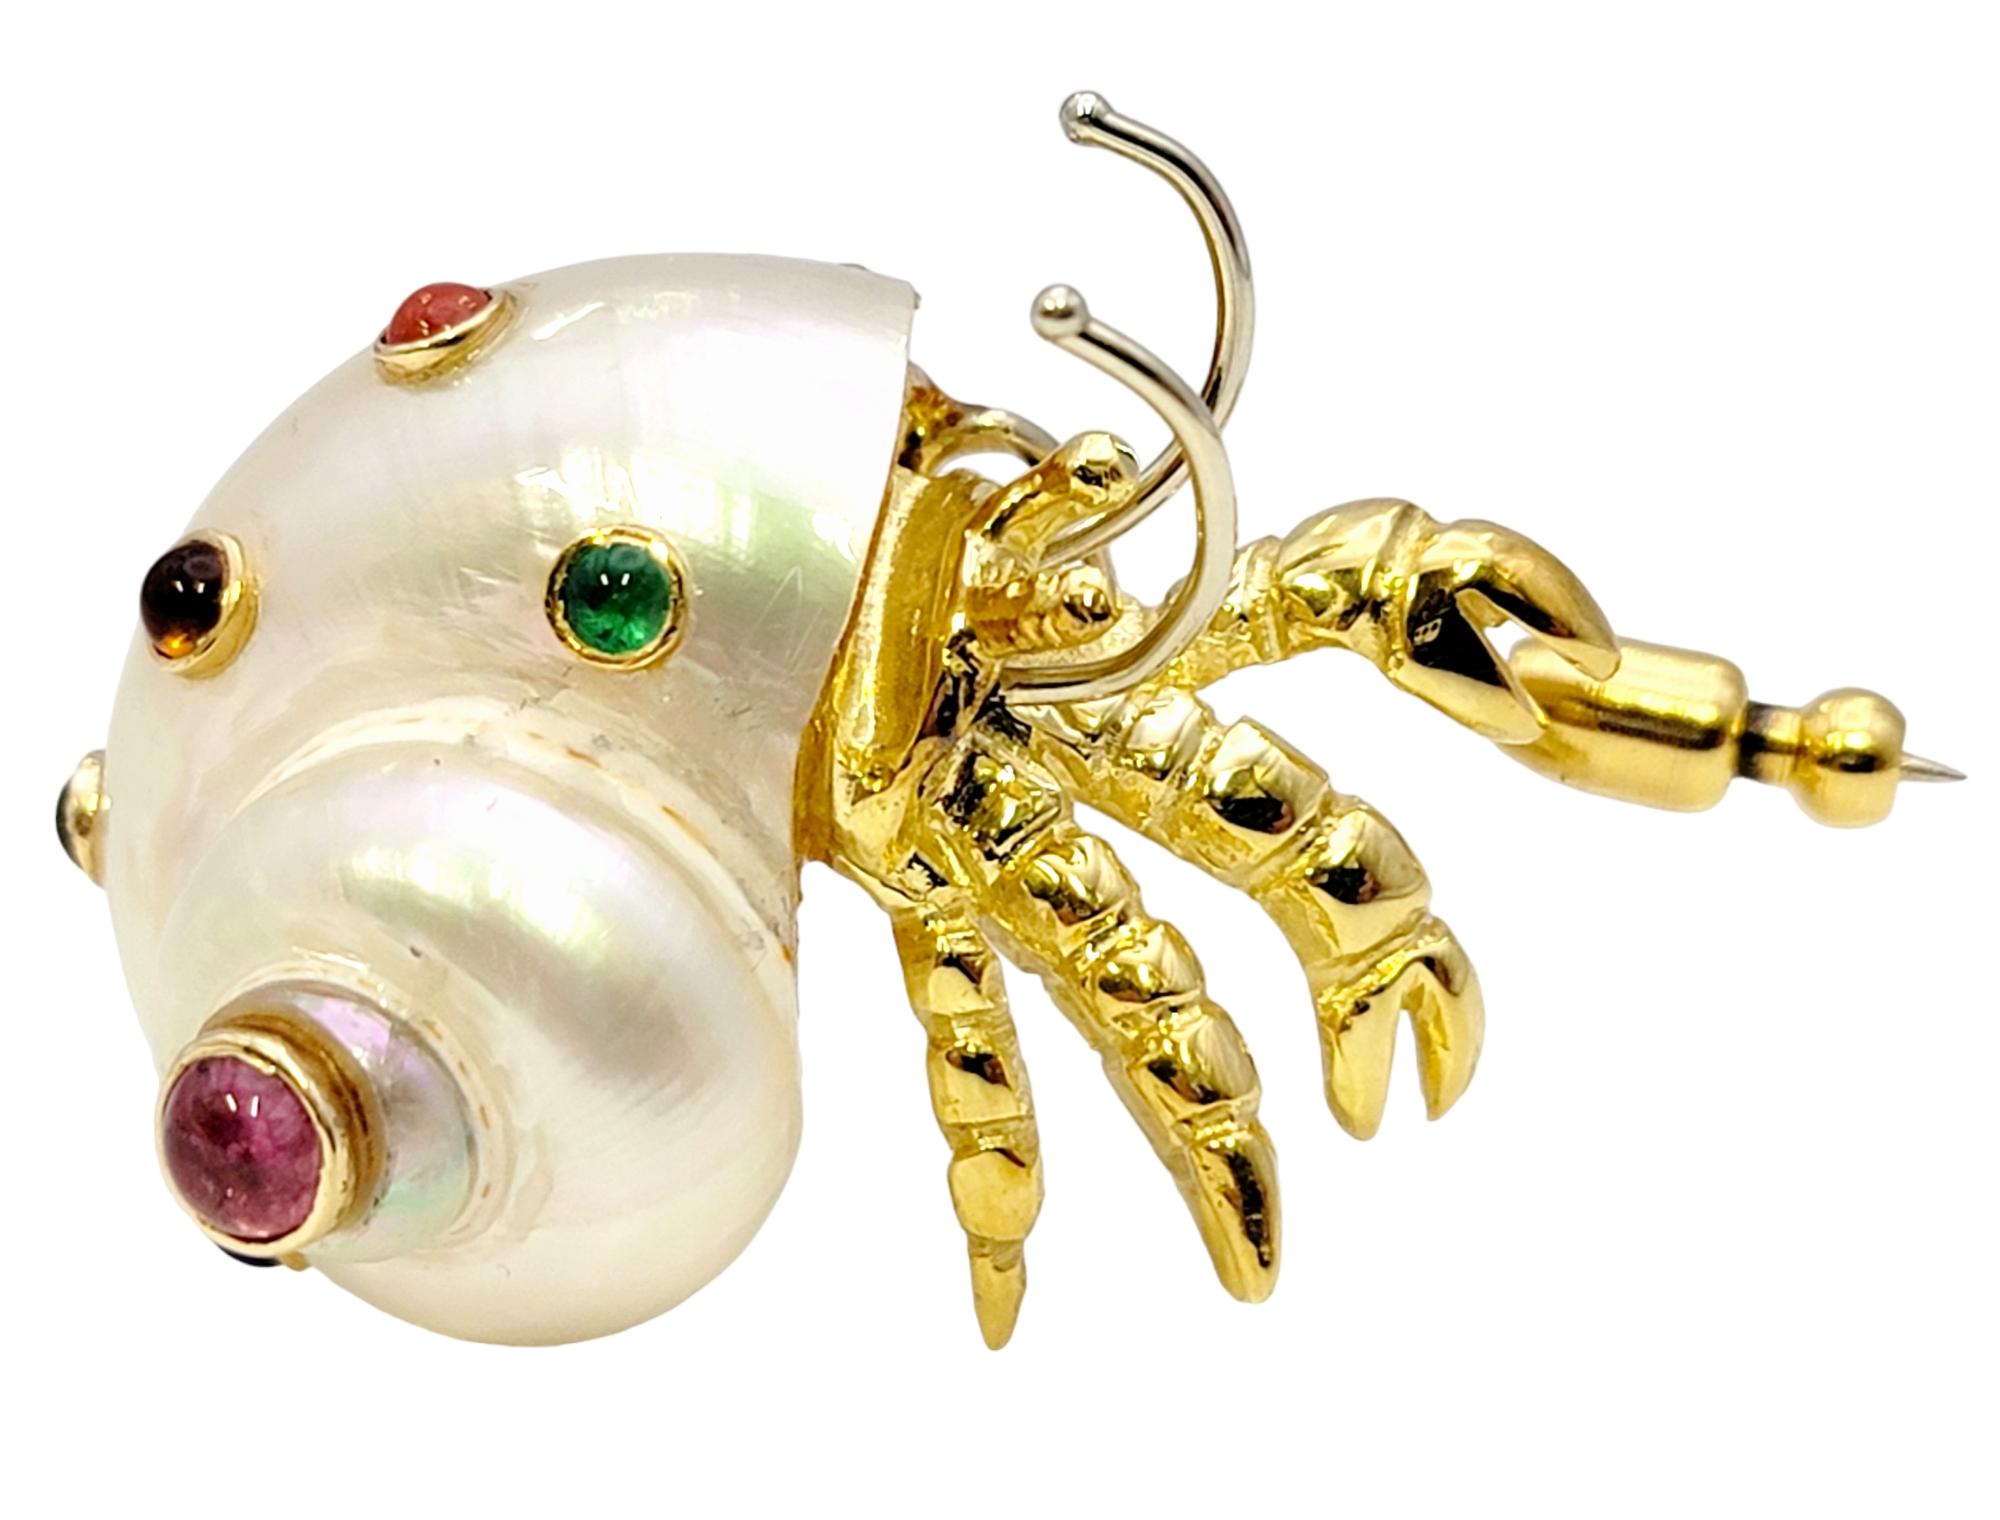 Calling all ocean lovers! This charming little crustacean will remind you of a blissful day at the beach. The modernized Mother of Pearl hermit crab is embellished with assorted colorful natural gemstones, shimmering beautifully in the light and